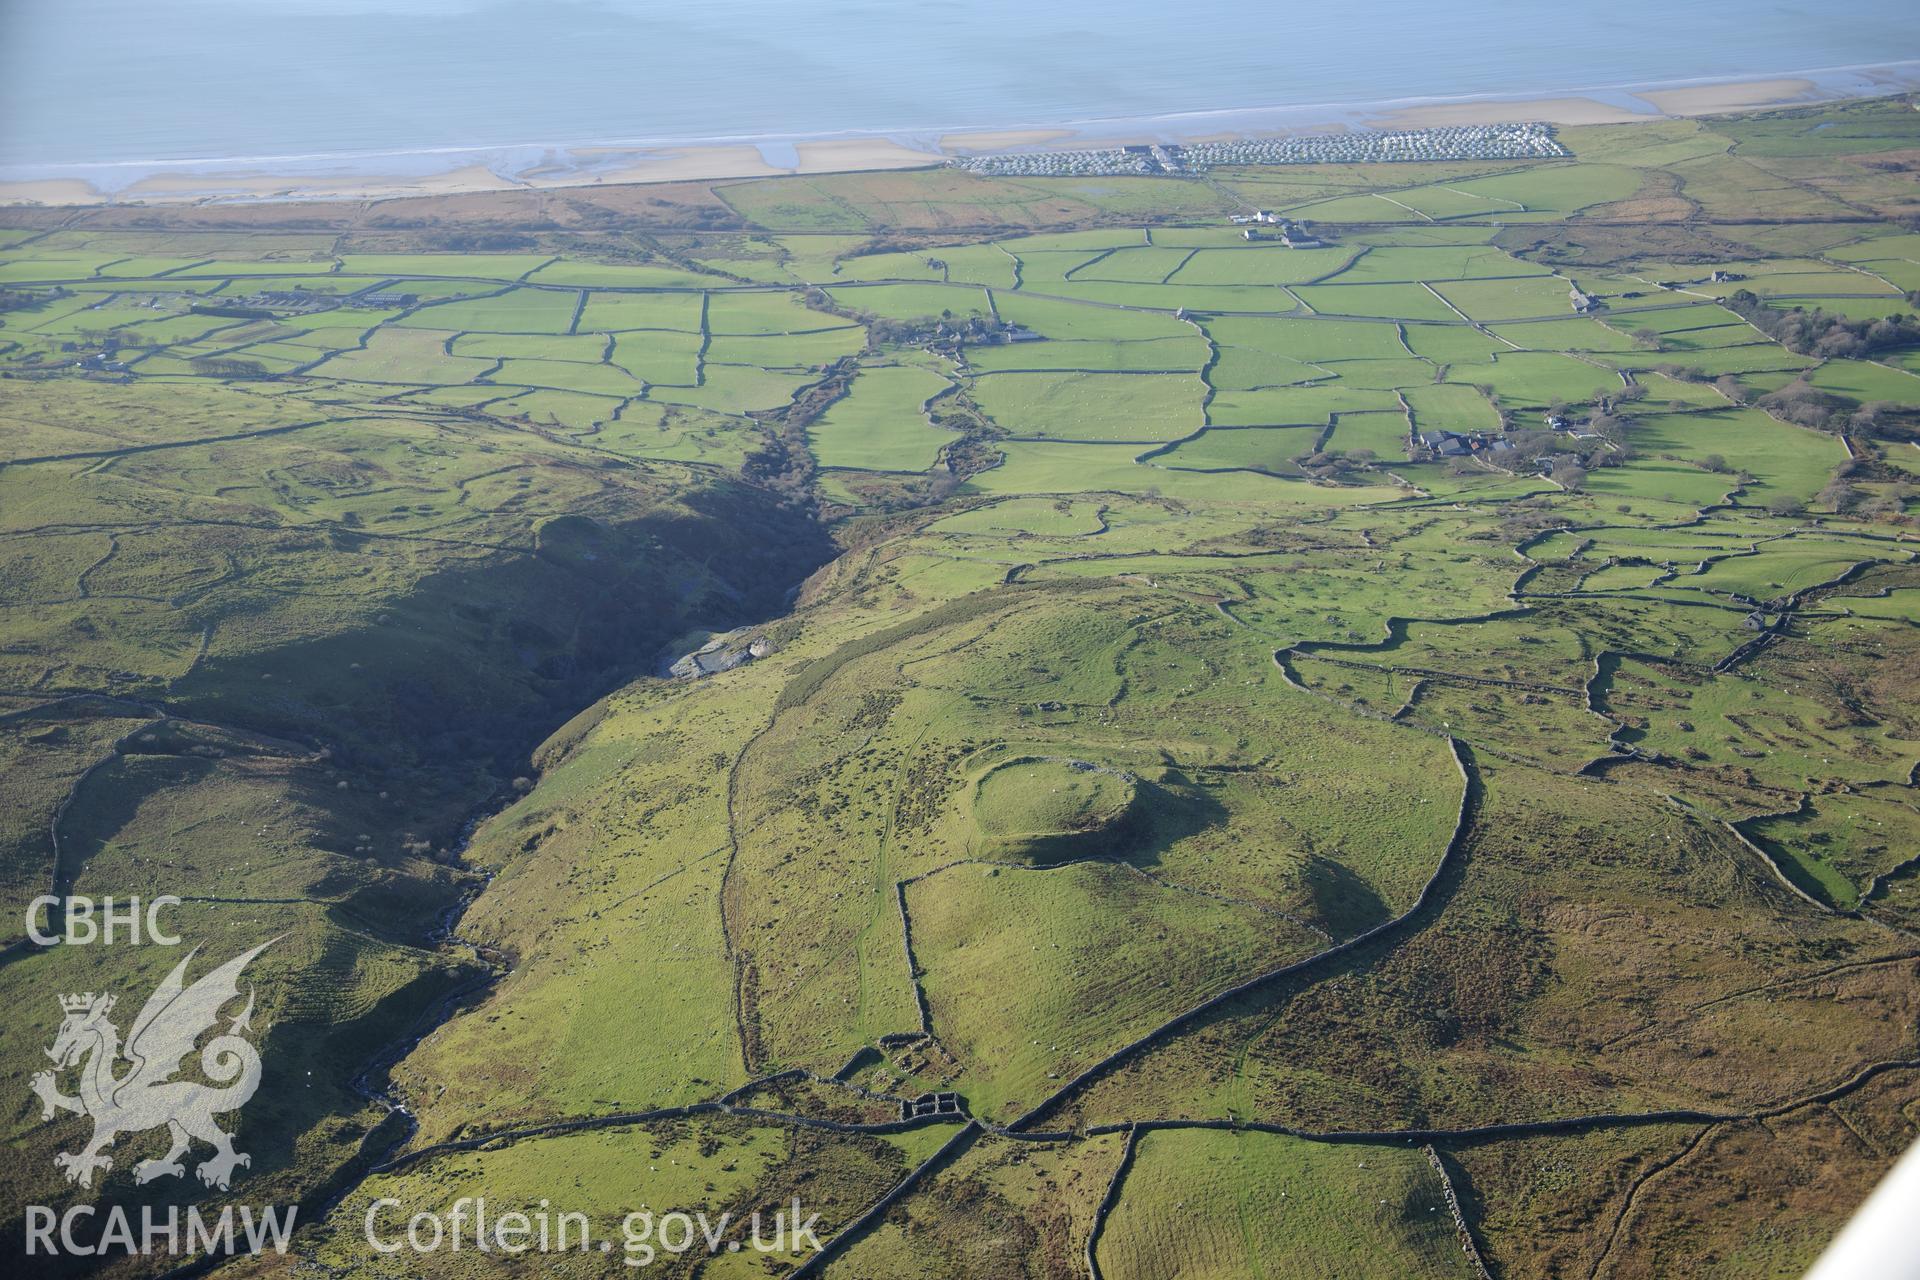 RCAHMW colour oblique photograph of Pen y Dinas, hillfort and upland landscape. Taken by Toby Driver on 10/12/2012.